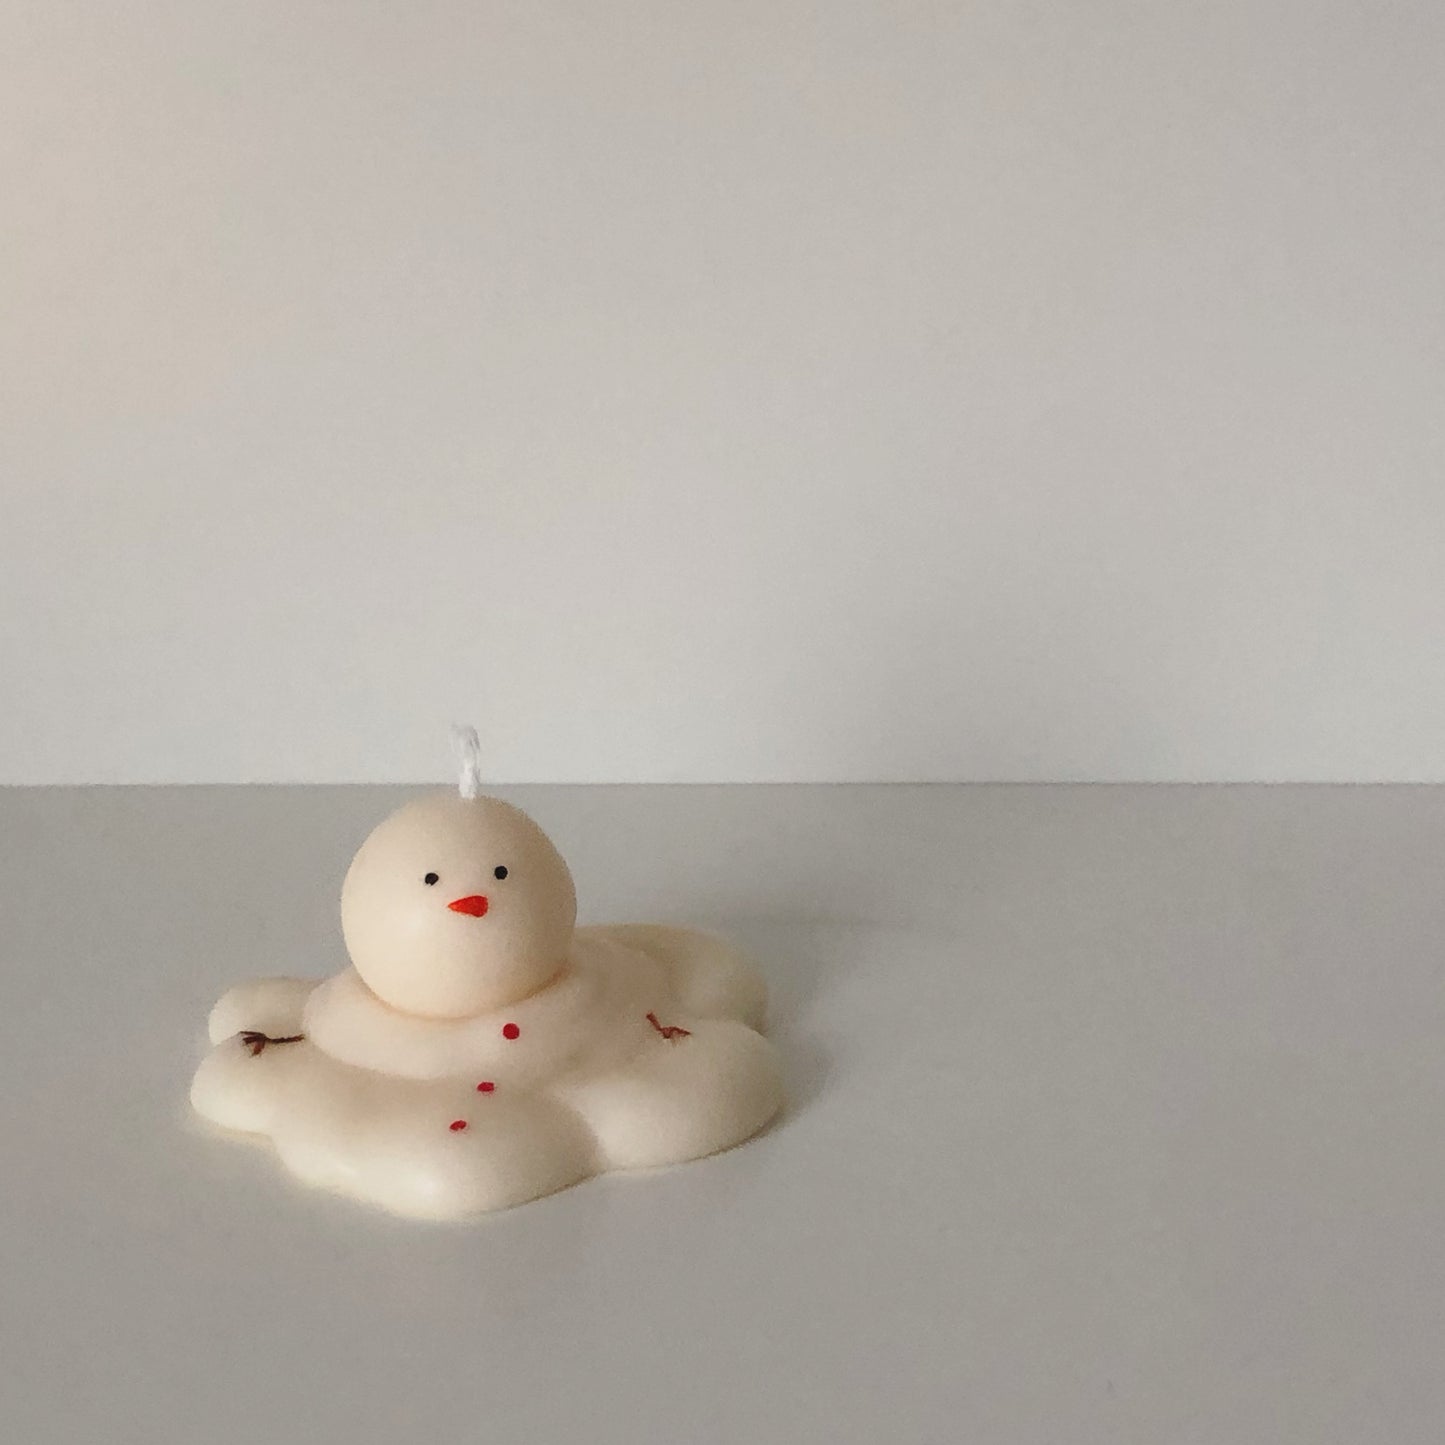 Melting Snowman Candle